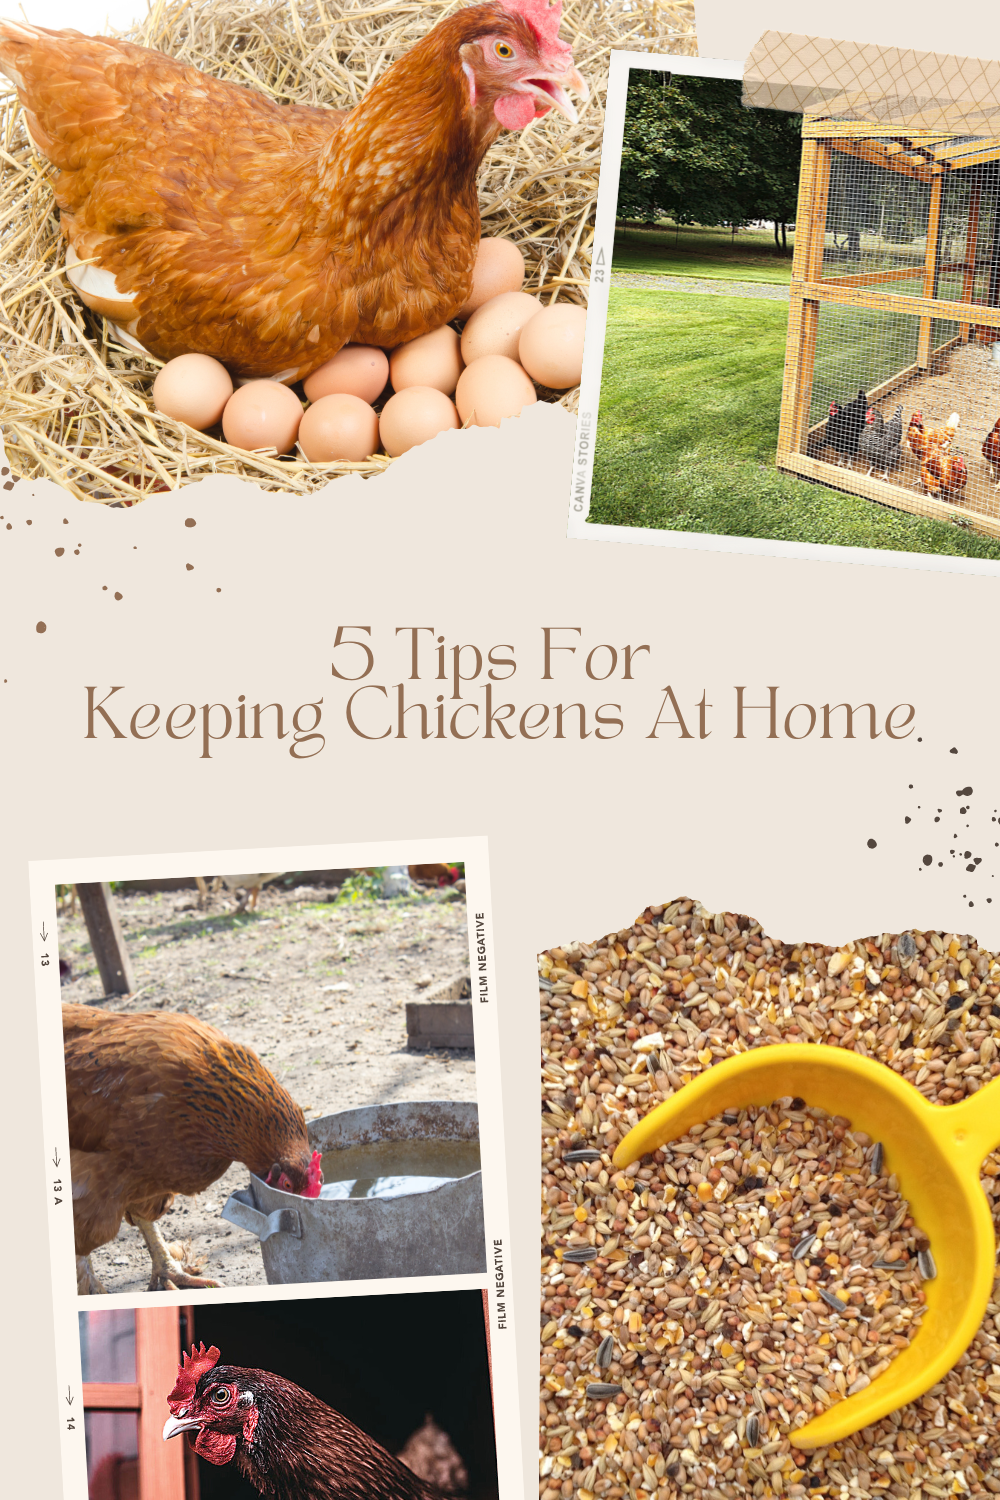 Chickens sitting on eggs, in a chicken coop, drinking water, chicken feed, etc.